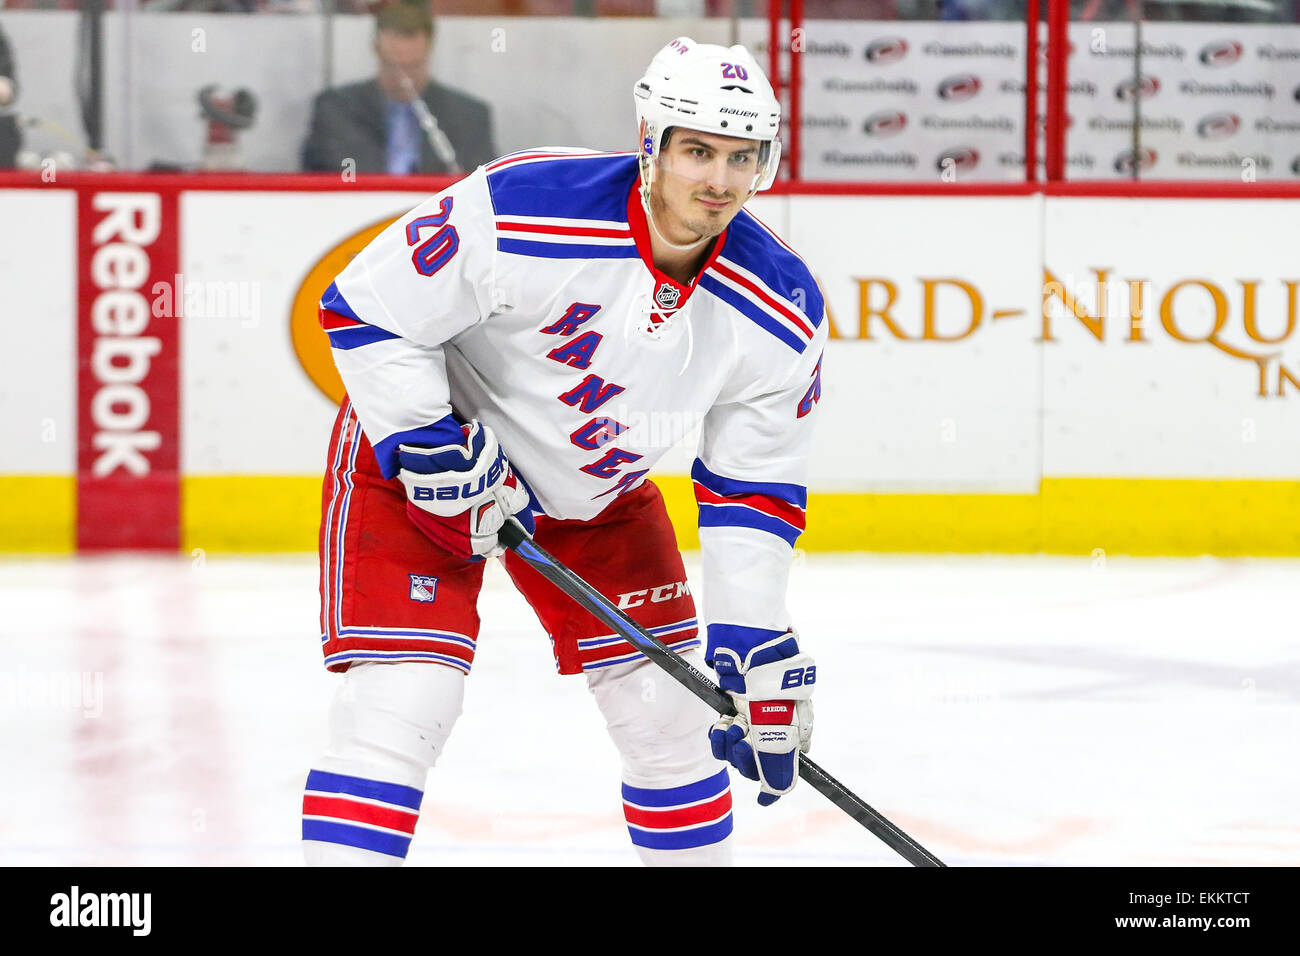 Chris Kreider goes from BC right into NHL playoffs - The Boston Globe